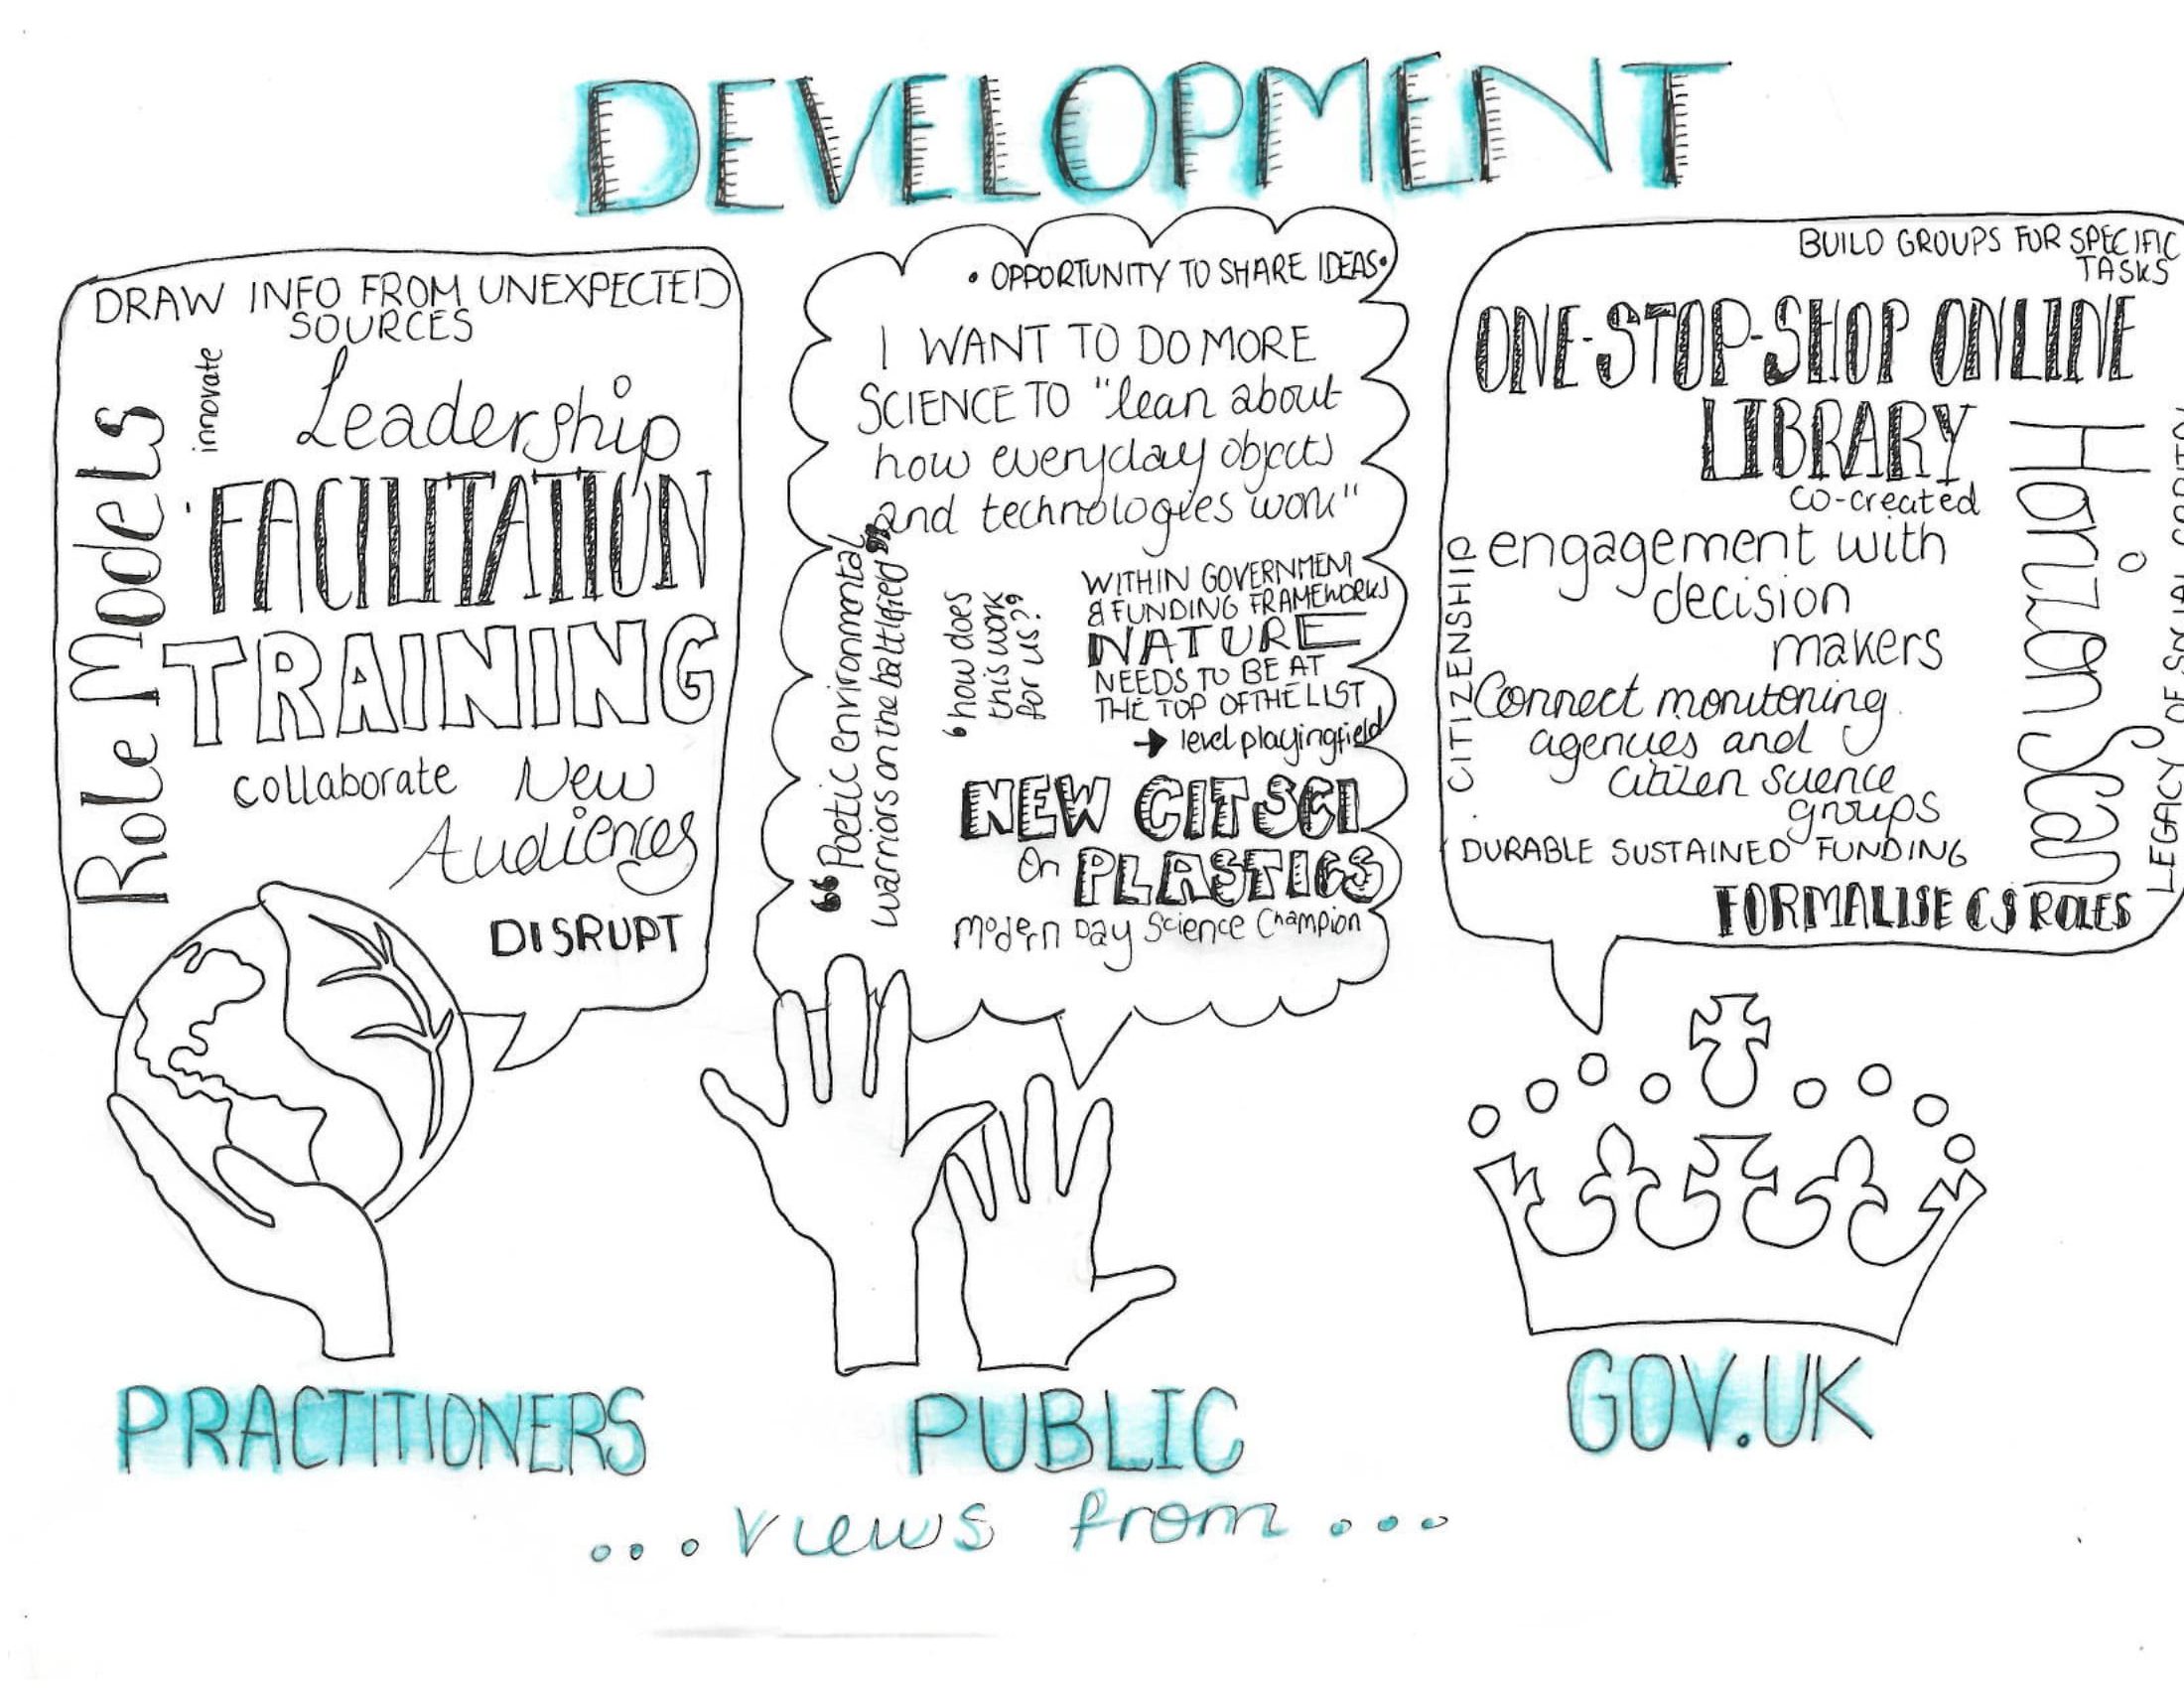 Key lessons and areas for development